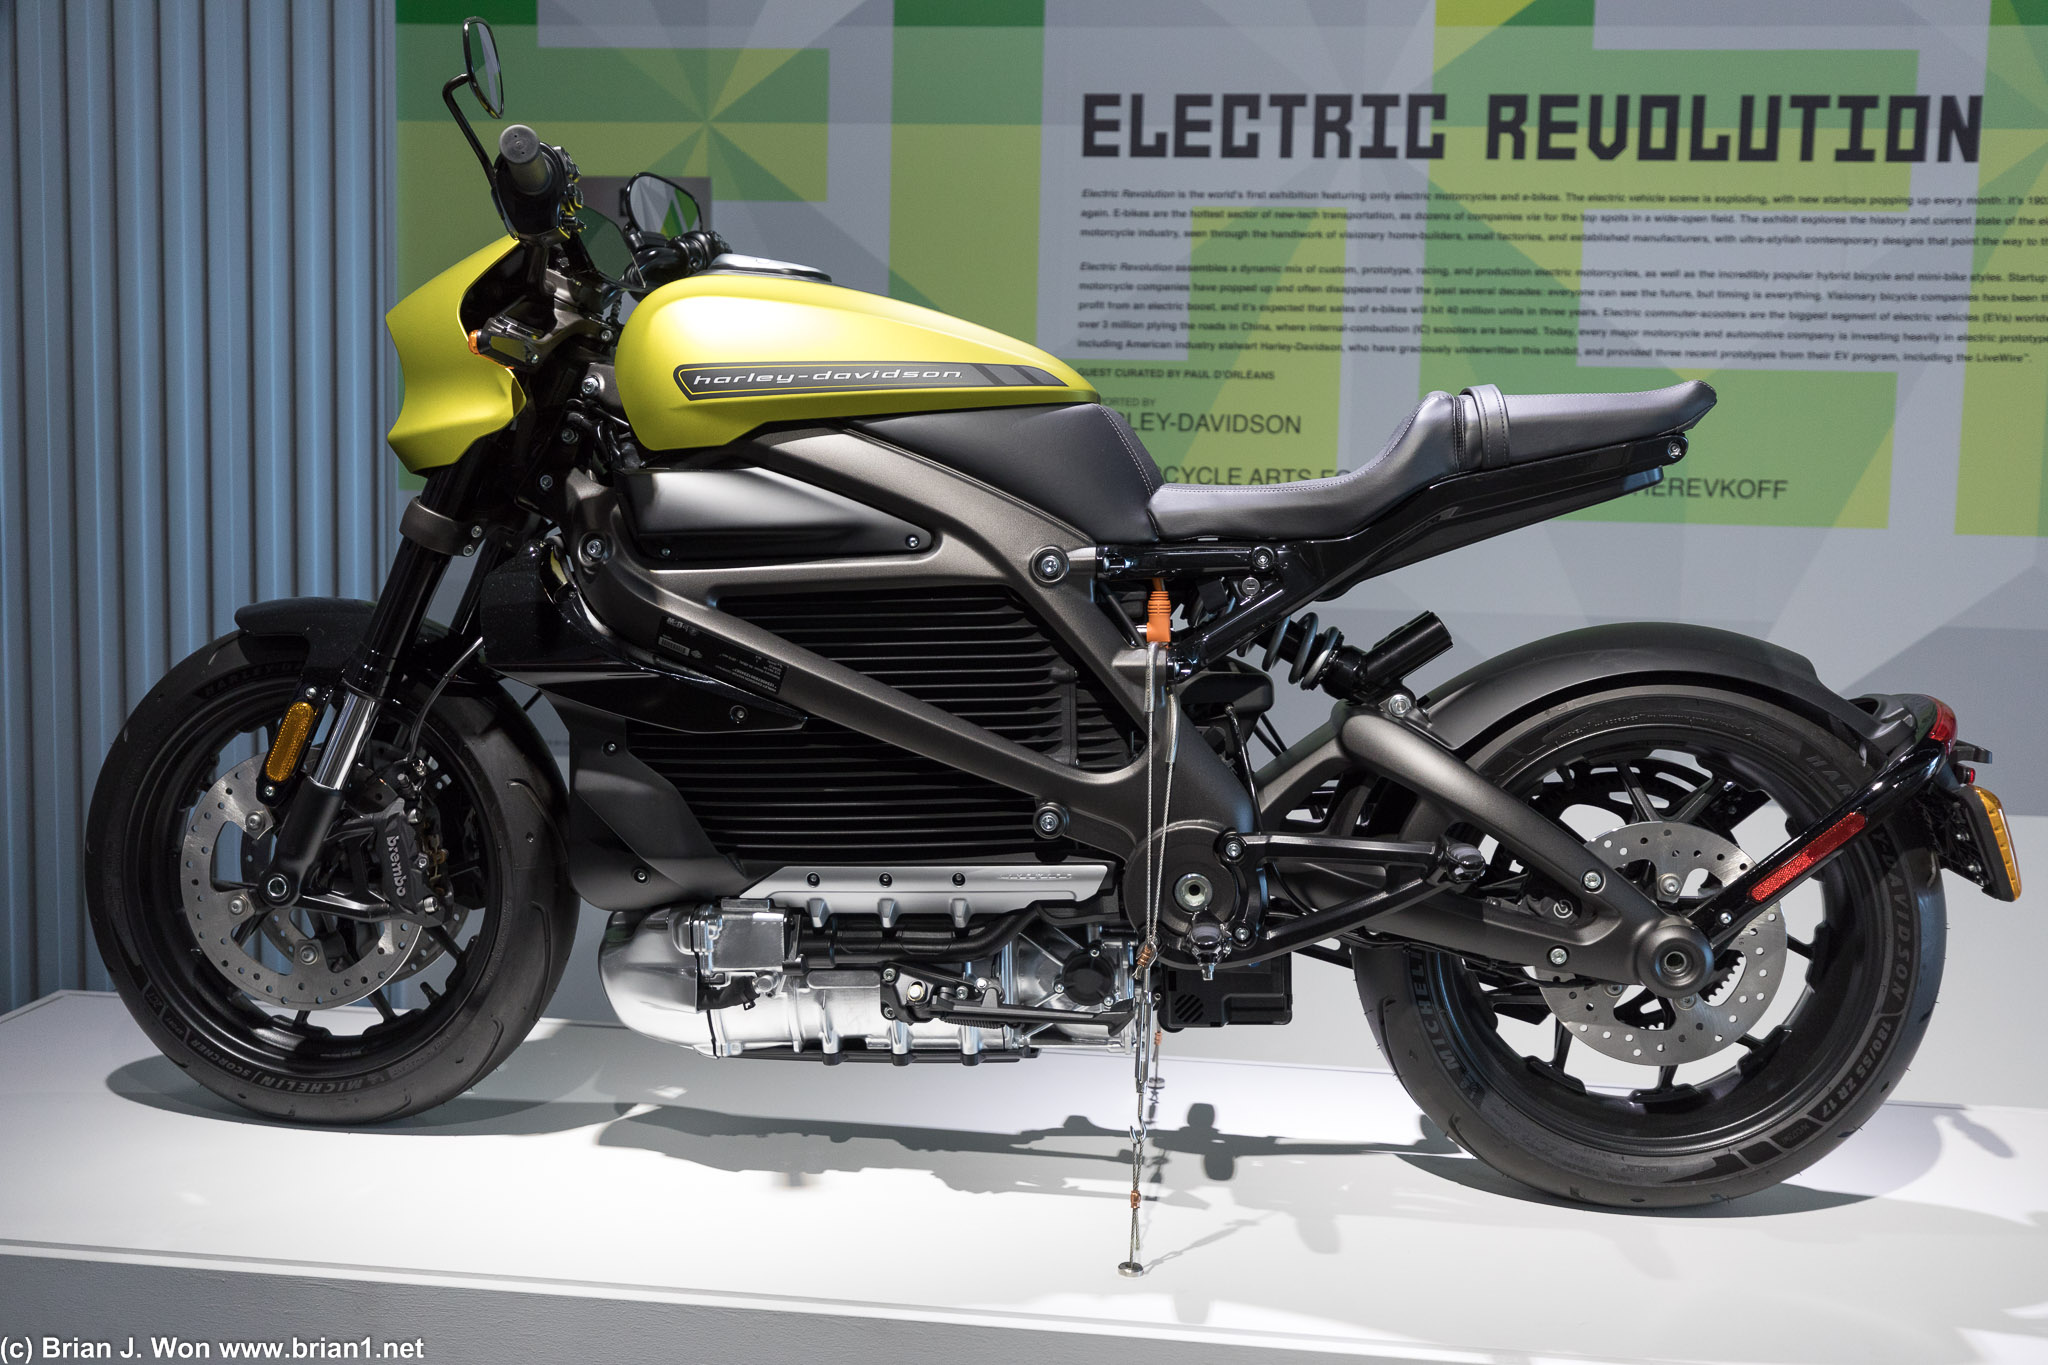 2020 Harley-Davidson LiveWire. Apparently selling like poop because it's so expensive.